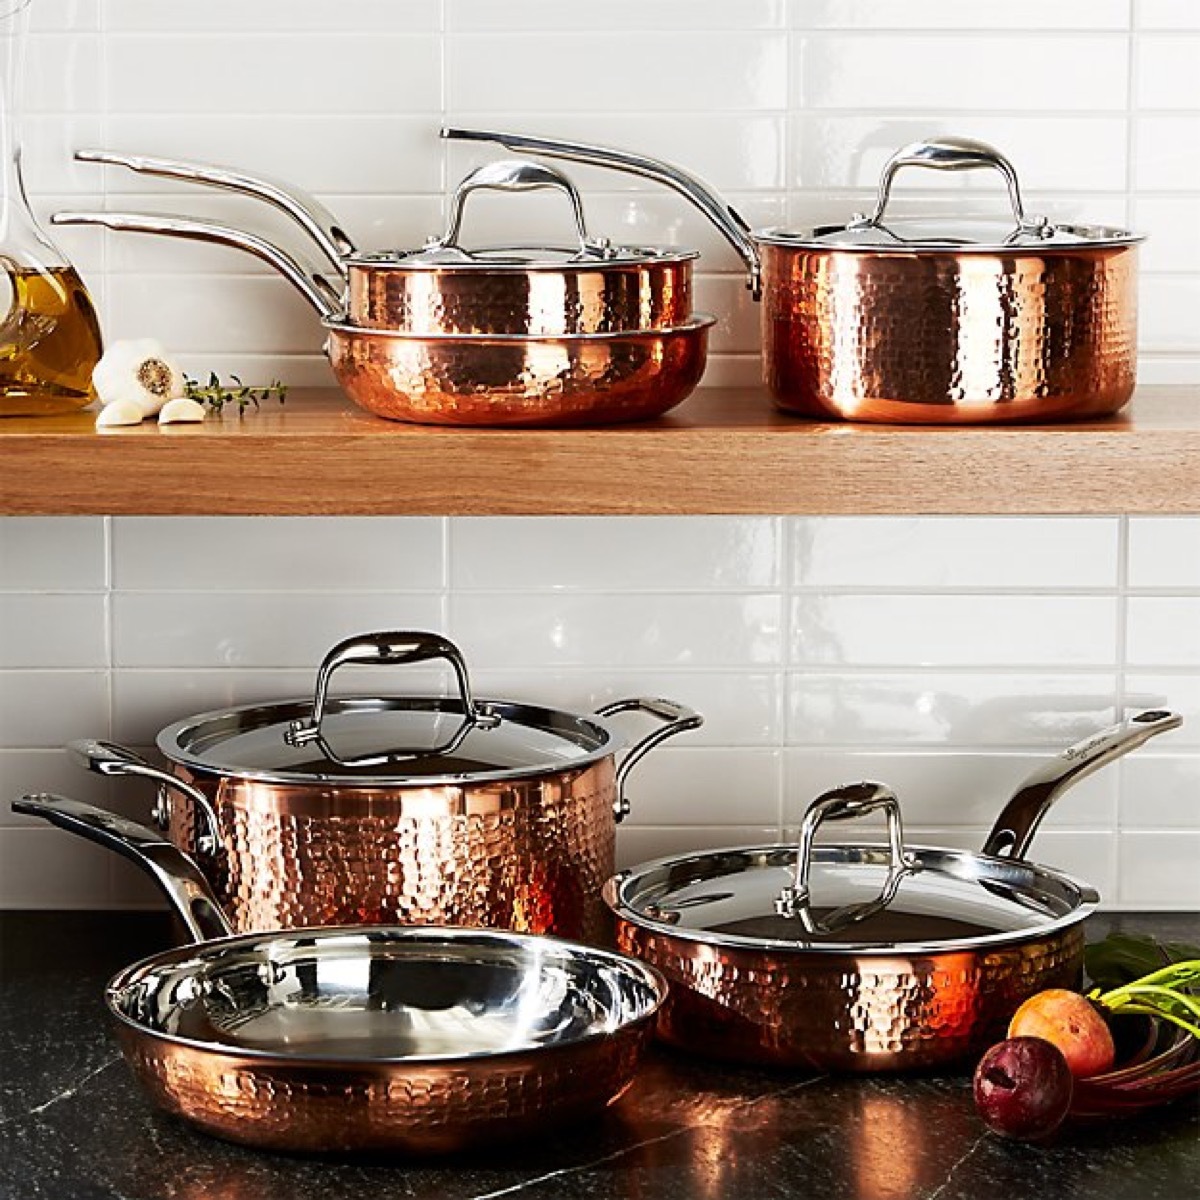 Copper cookware in a kitchen